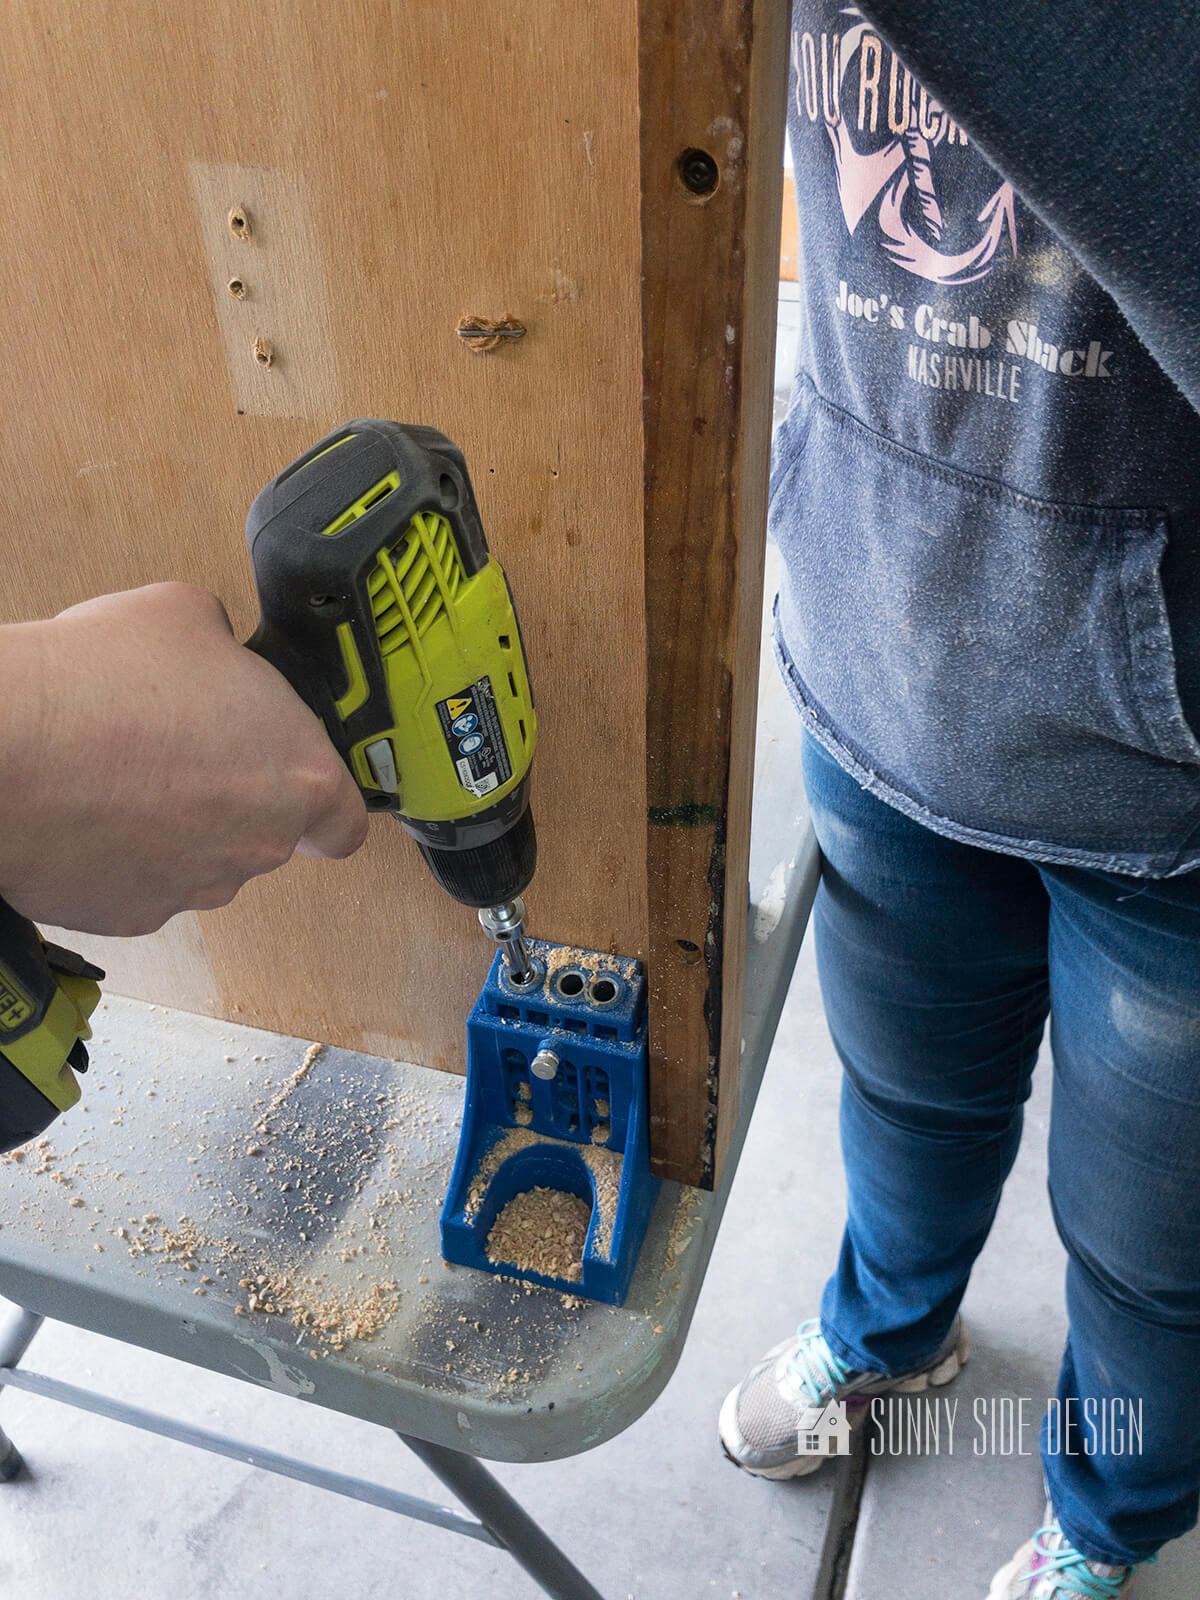 Pocket hole jig is secured to folding table top and woman's hand holds drill, drilling holes for pocket screws.